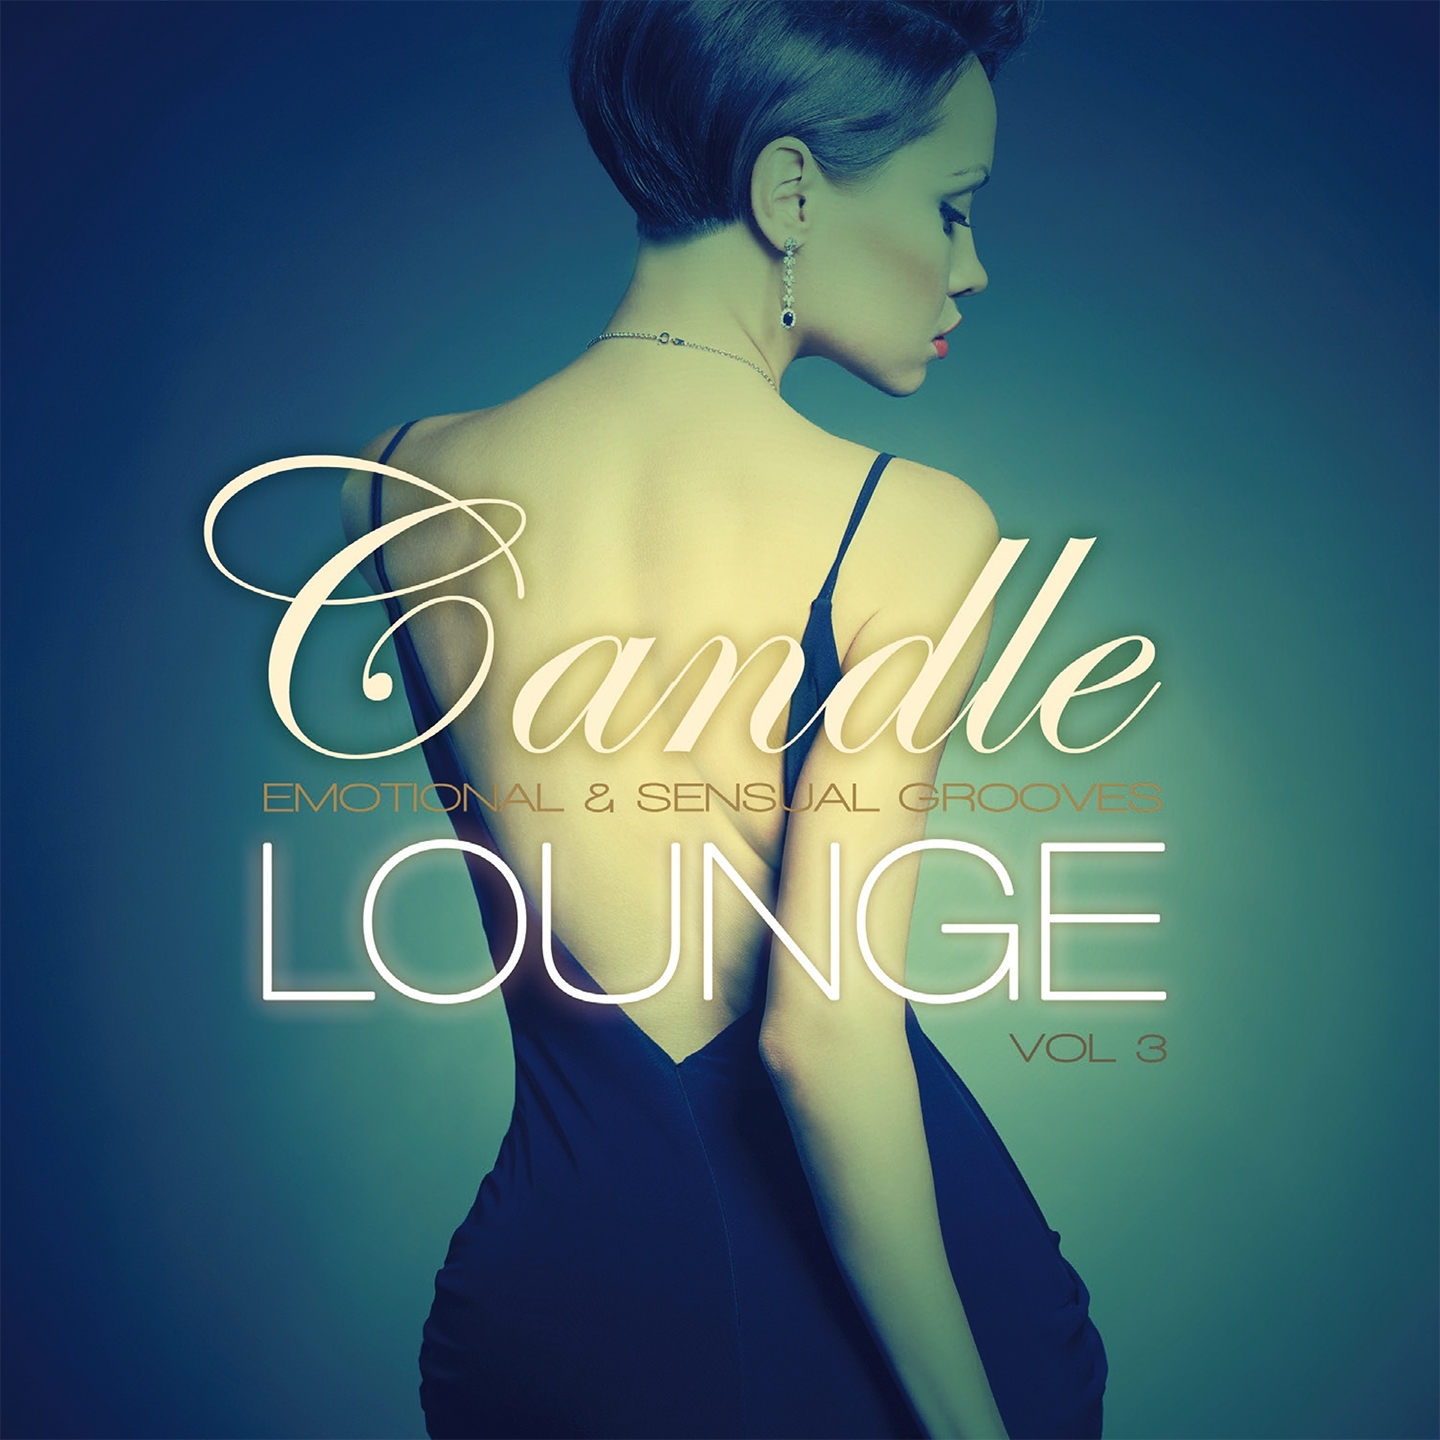 Candle Lounge, Vol. 3 (Compiled & Mixed by Henri Kohn)